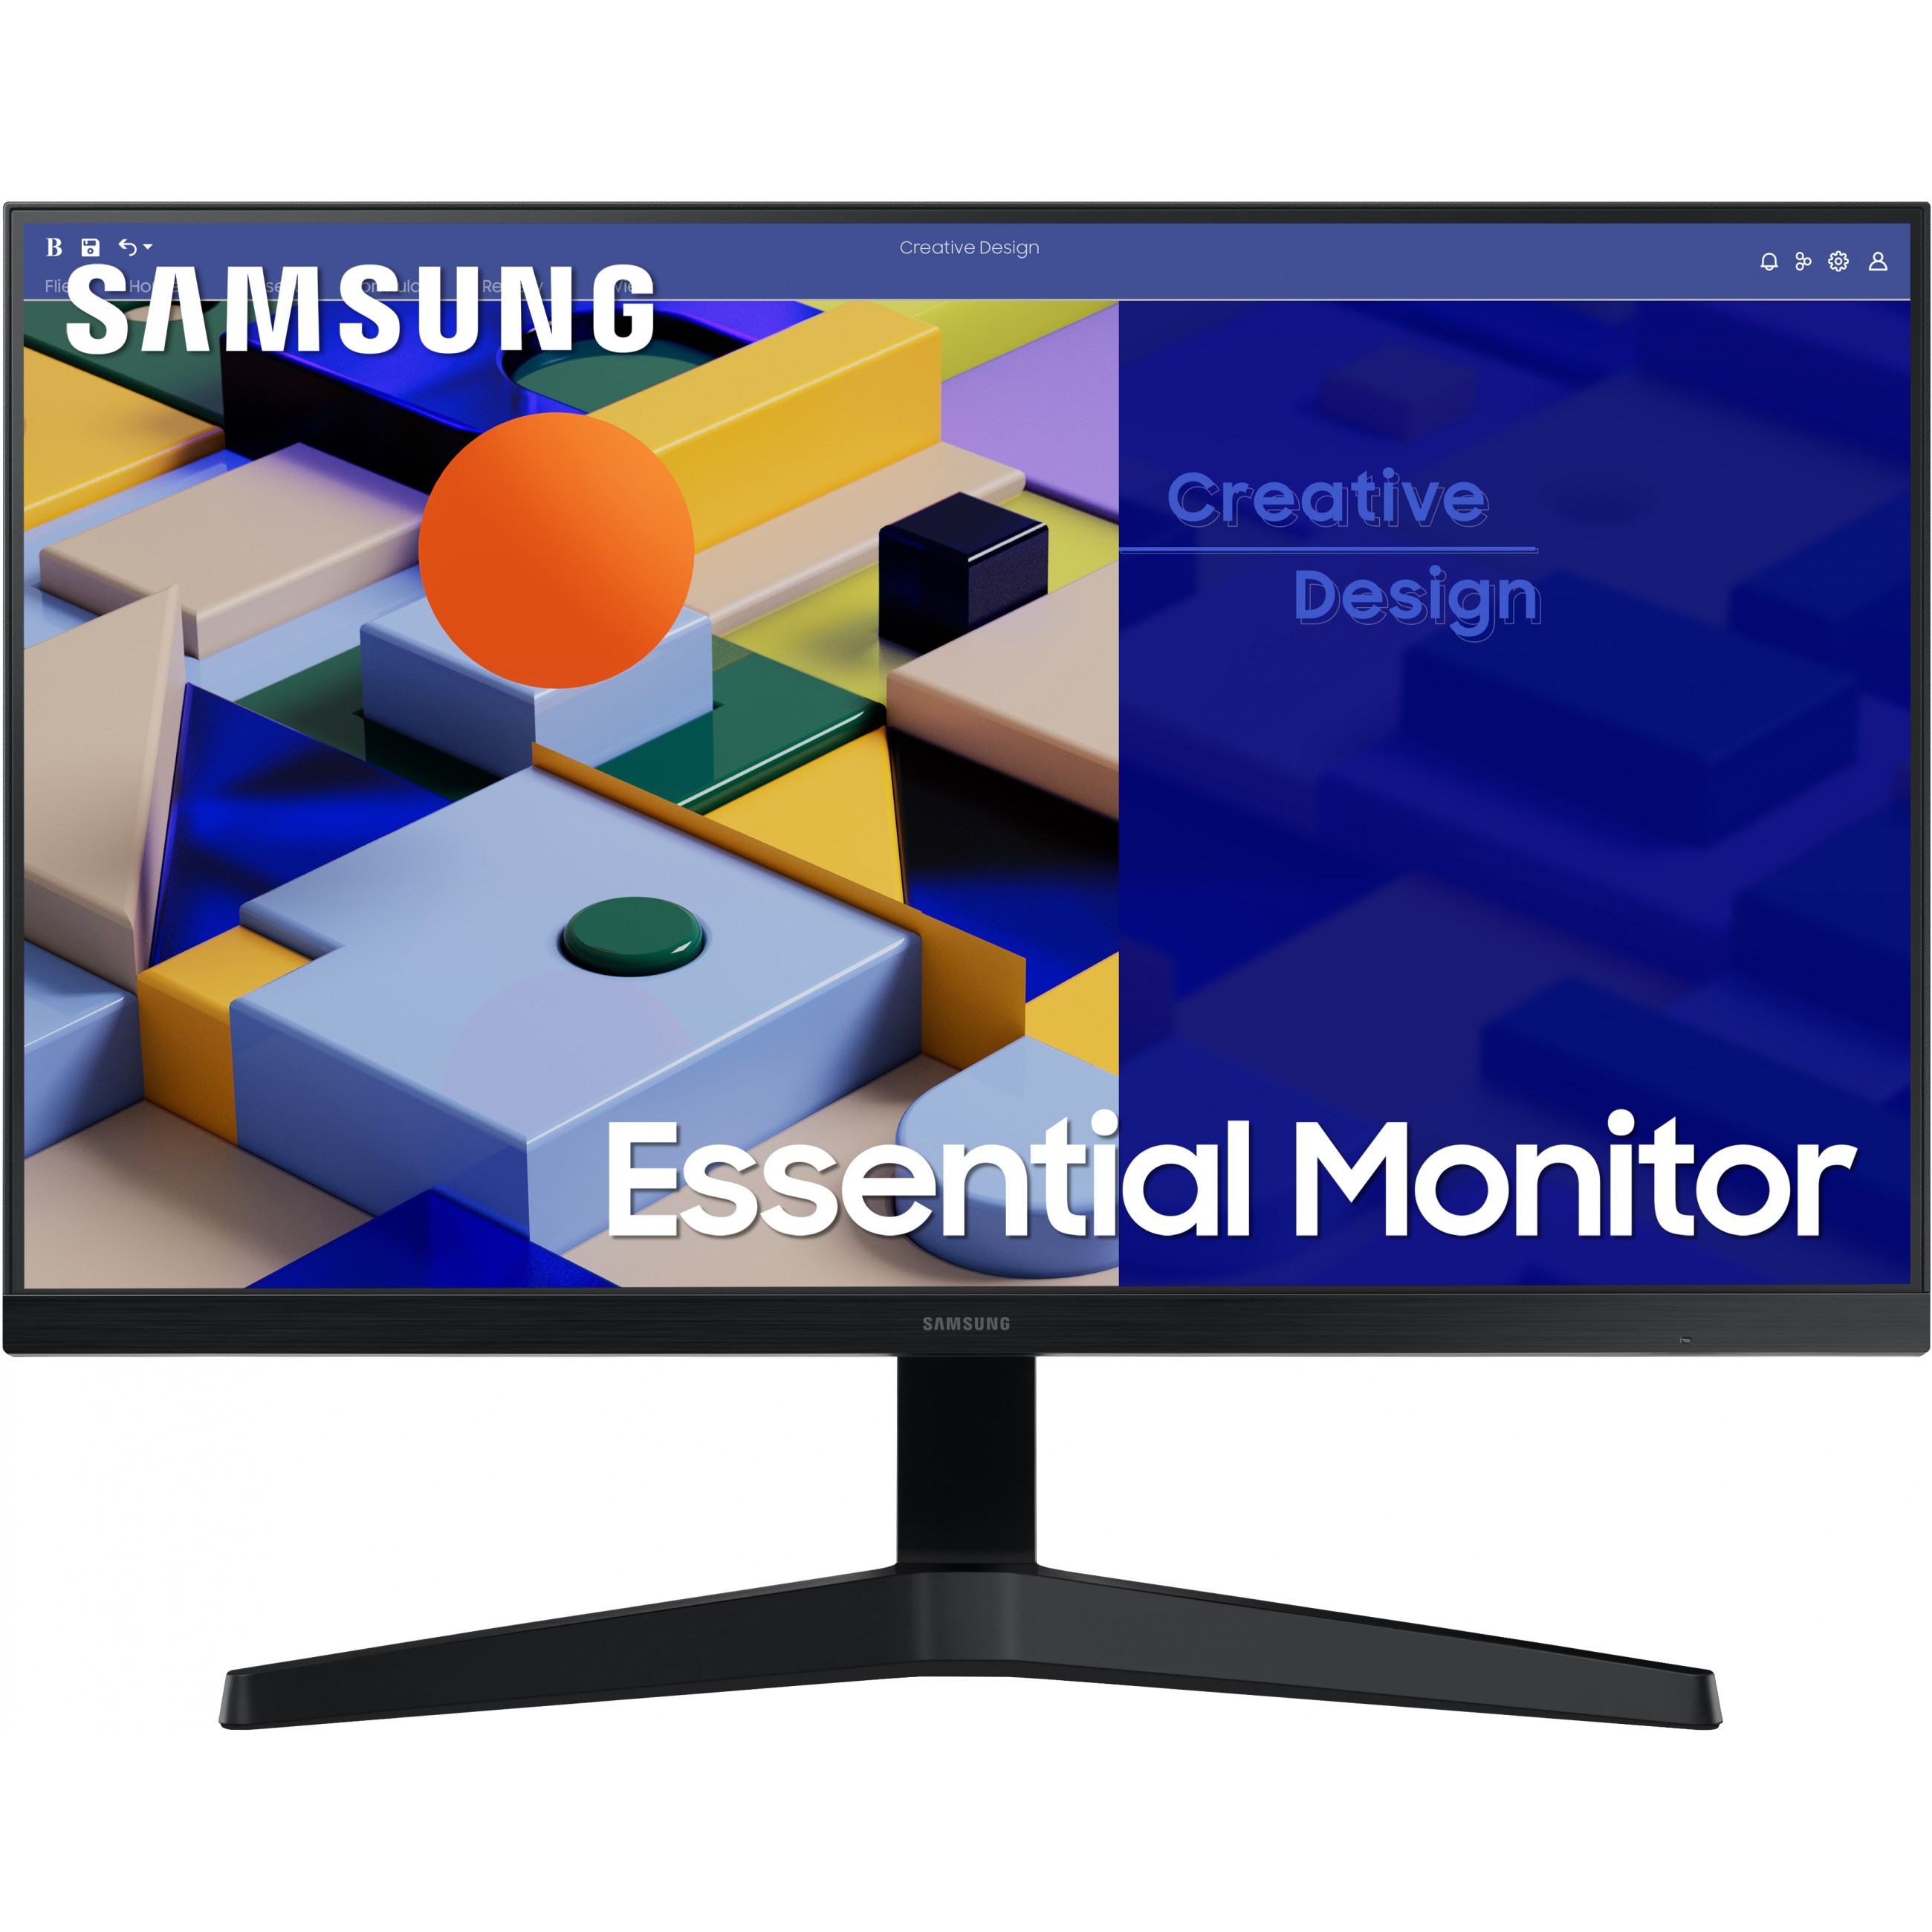 Samsung Essential Monitor S3 S31C LED display - LS24C310EAUXEN